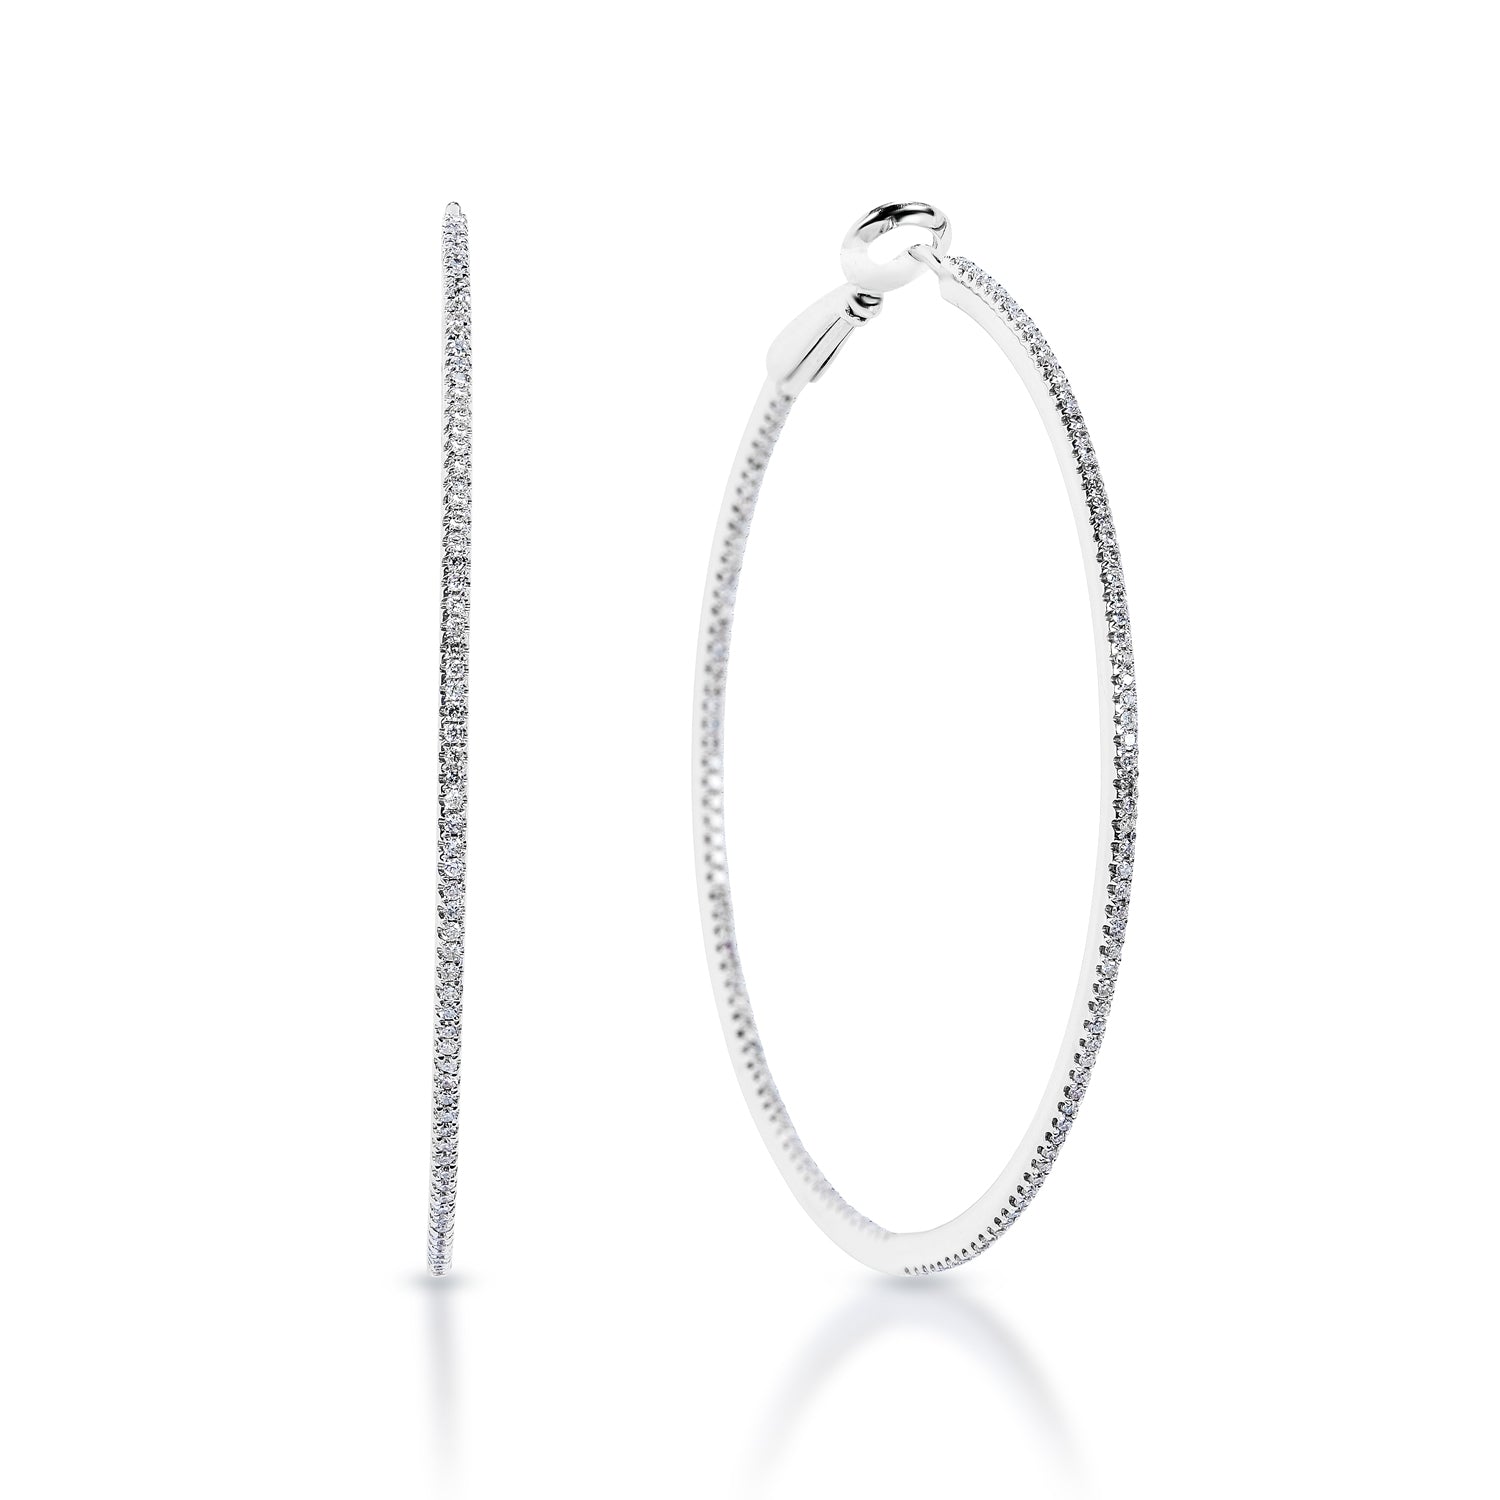 Uncover the Best Way to Style Hoop Earrings